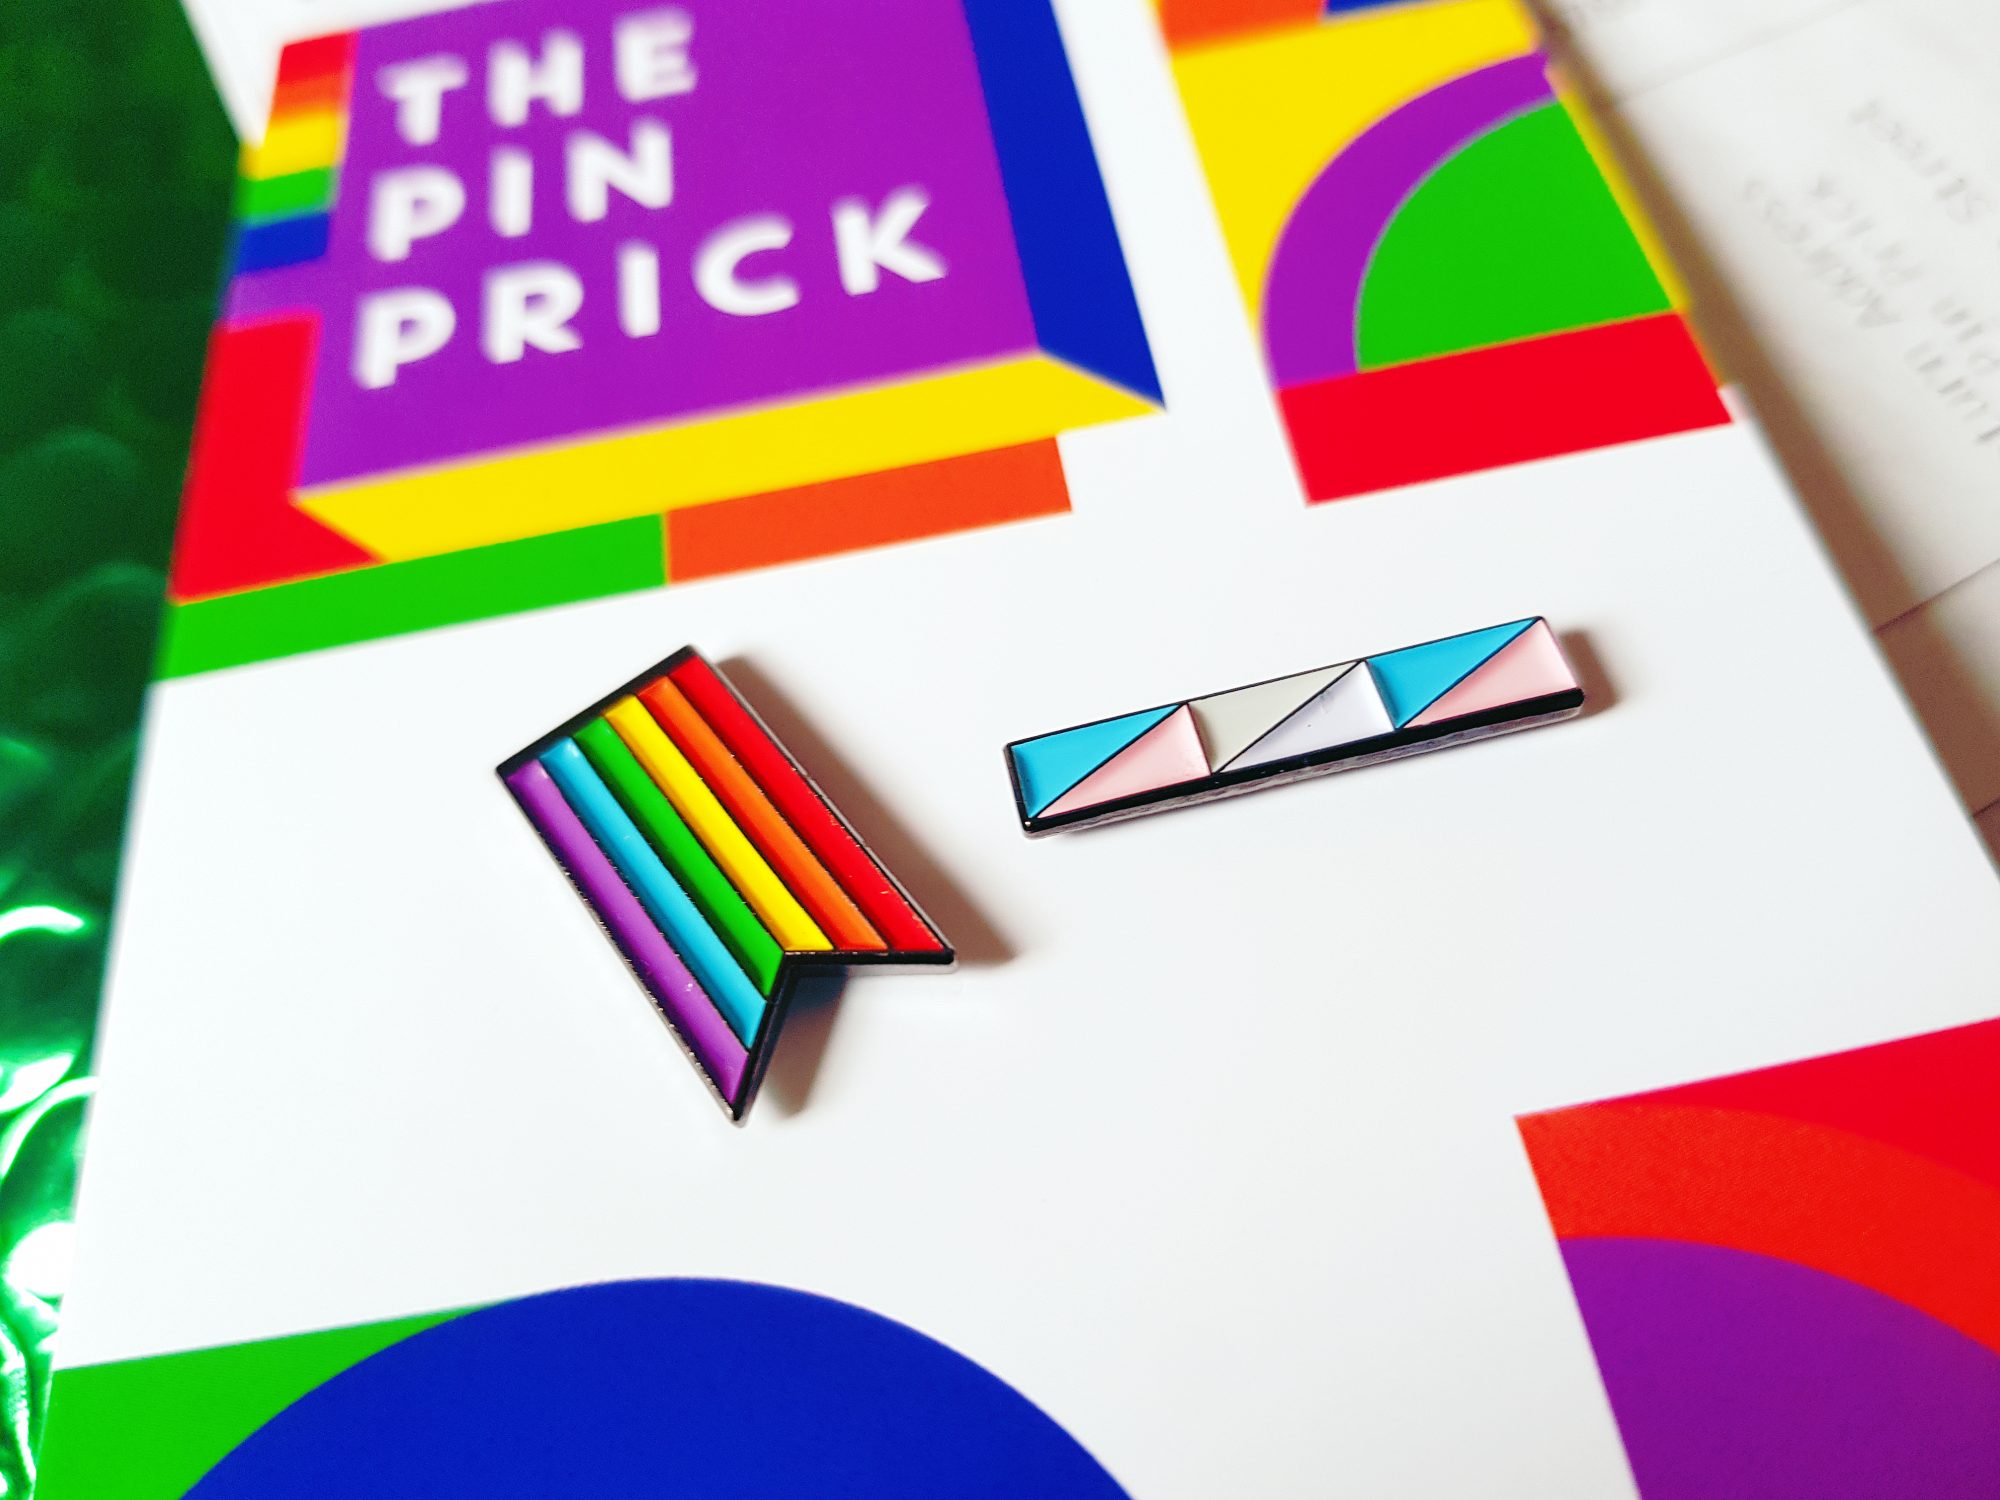 A close up photo of two enamel pin badges. The badge on the left is a rainbow flag, the badge on the right is a long bar with pink, blue, and white shades - representing transgender flag.